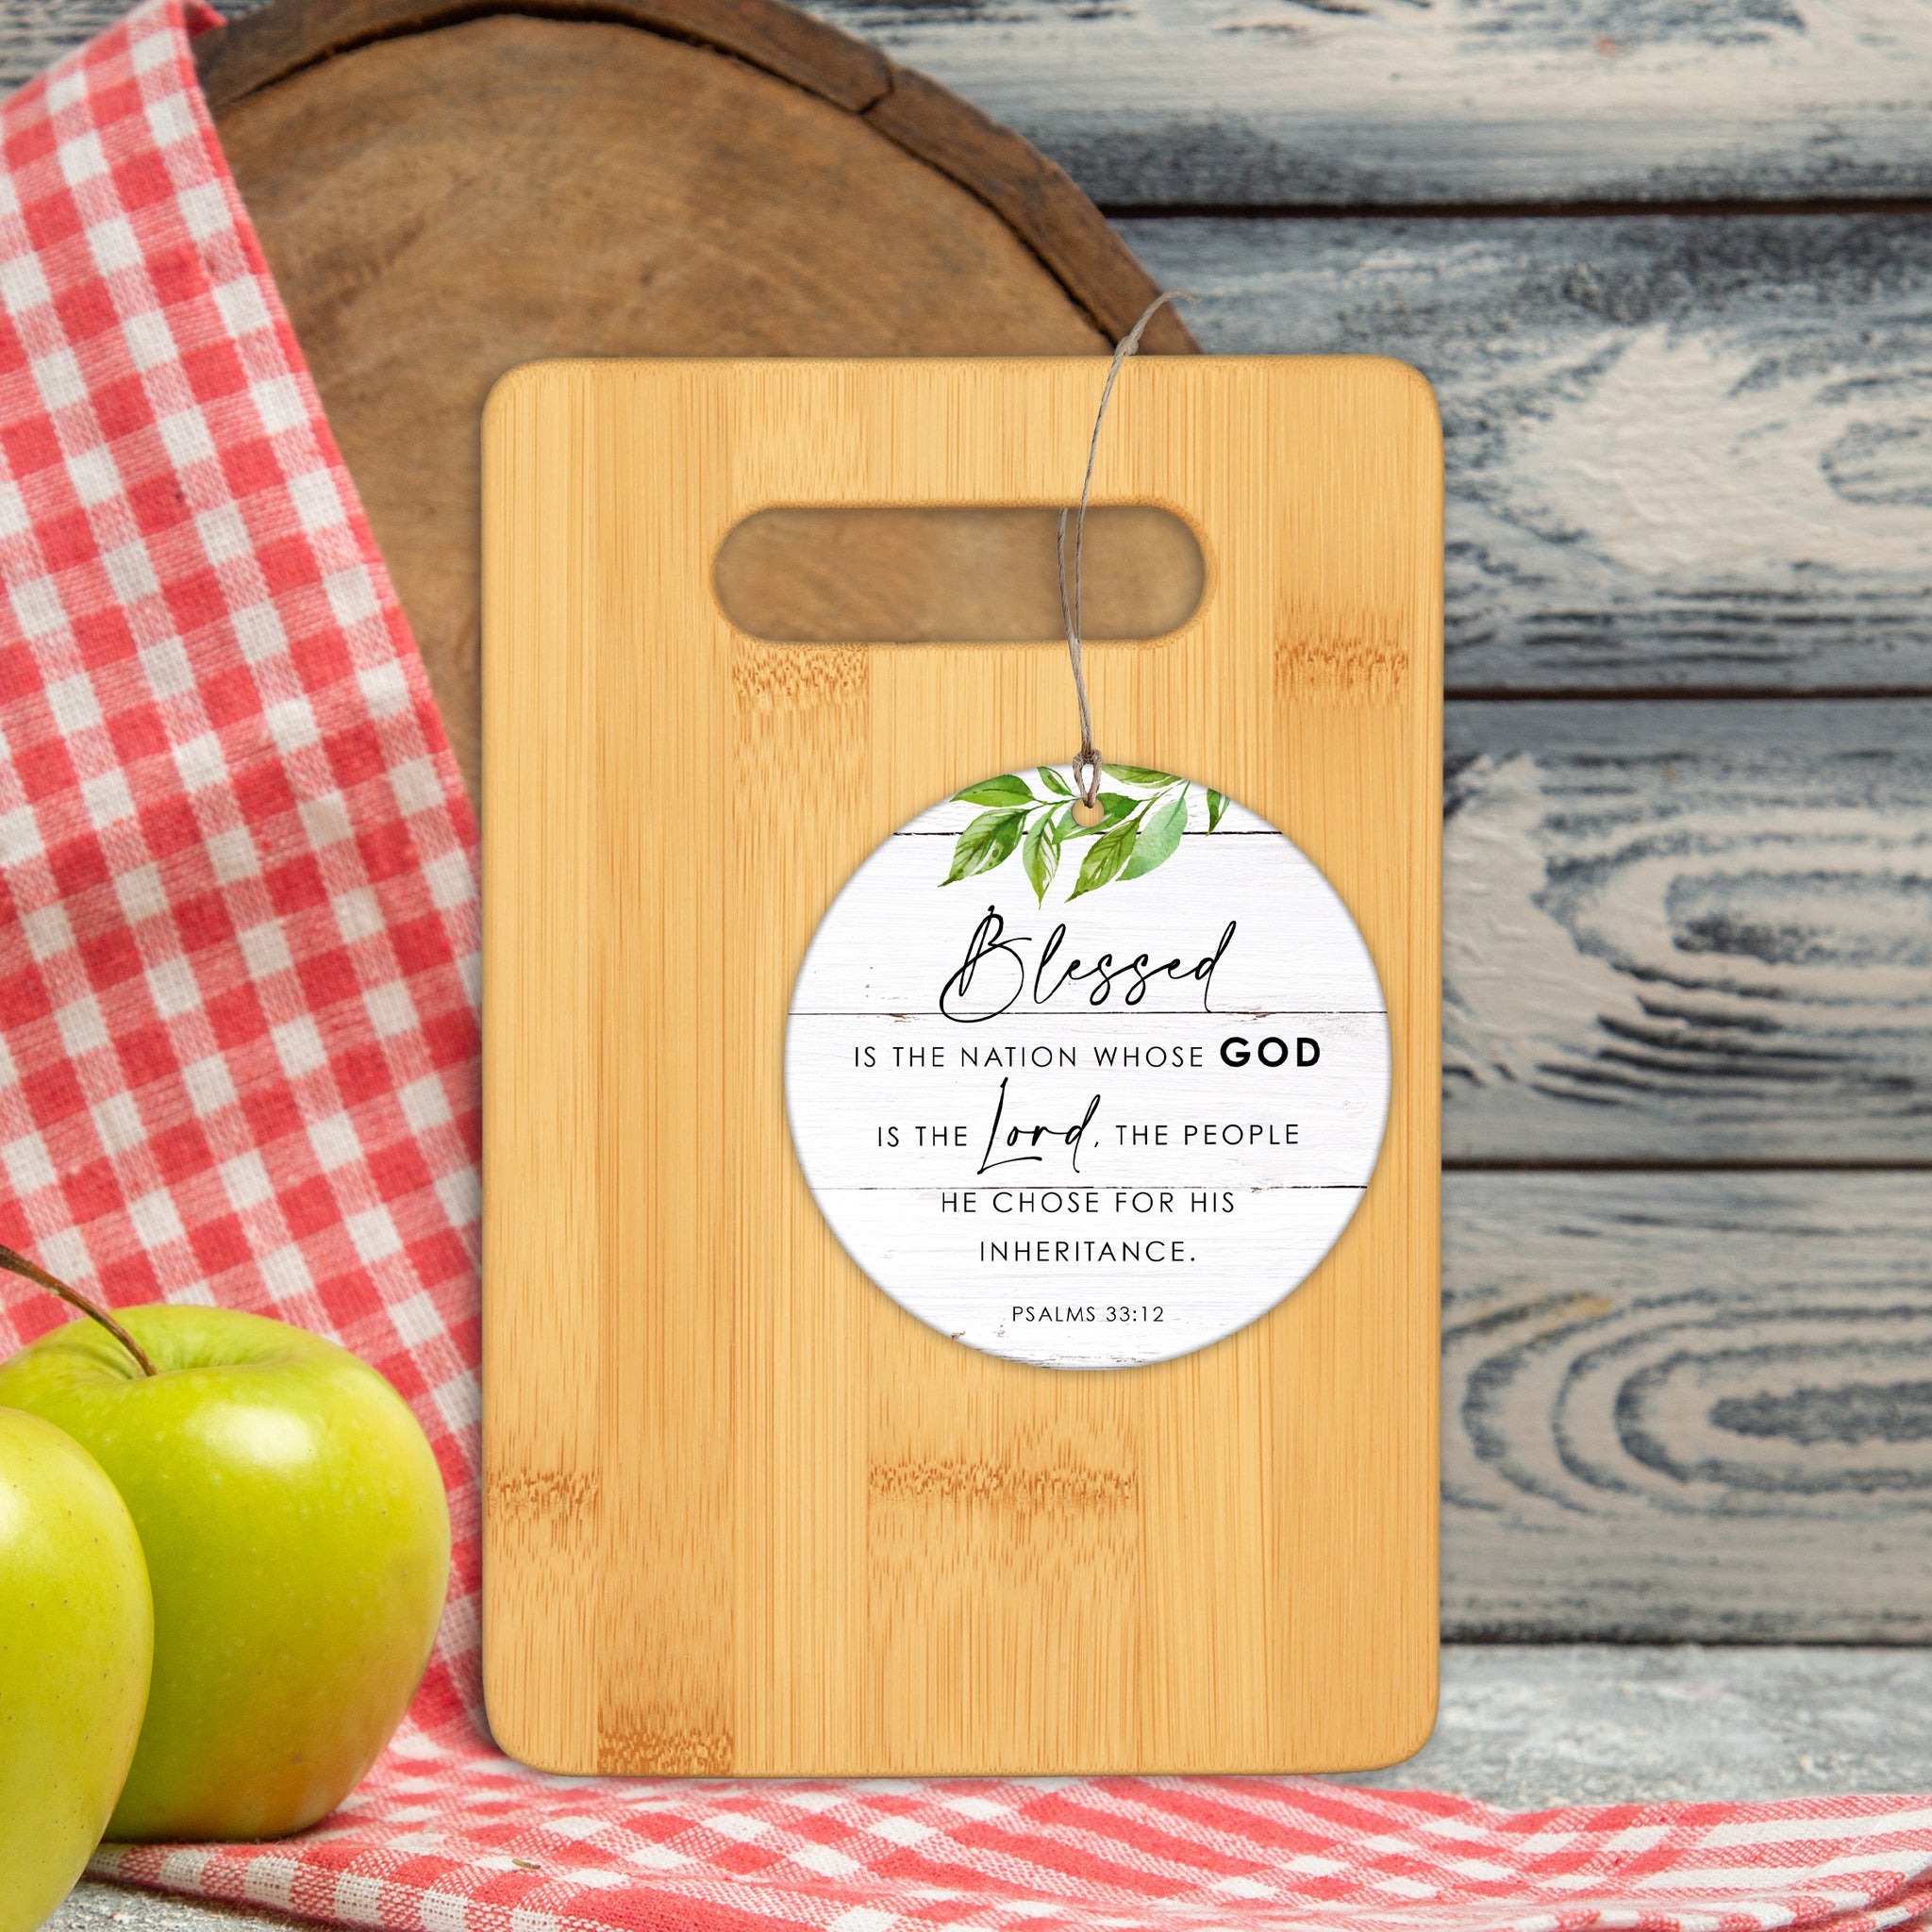 Bamboo cutting board with custom ornament by LifeSong Milestones